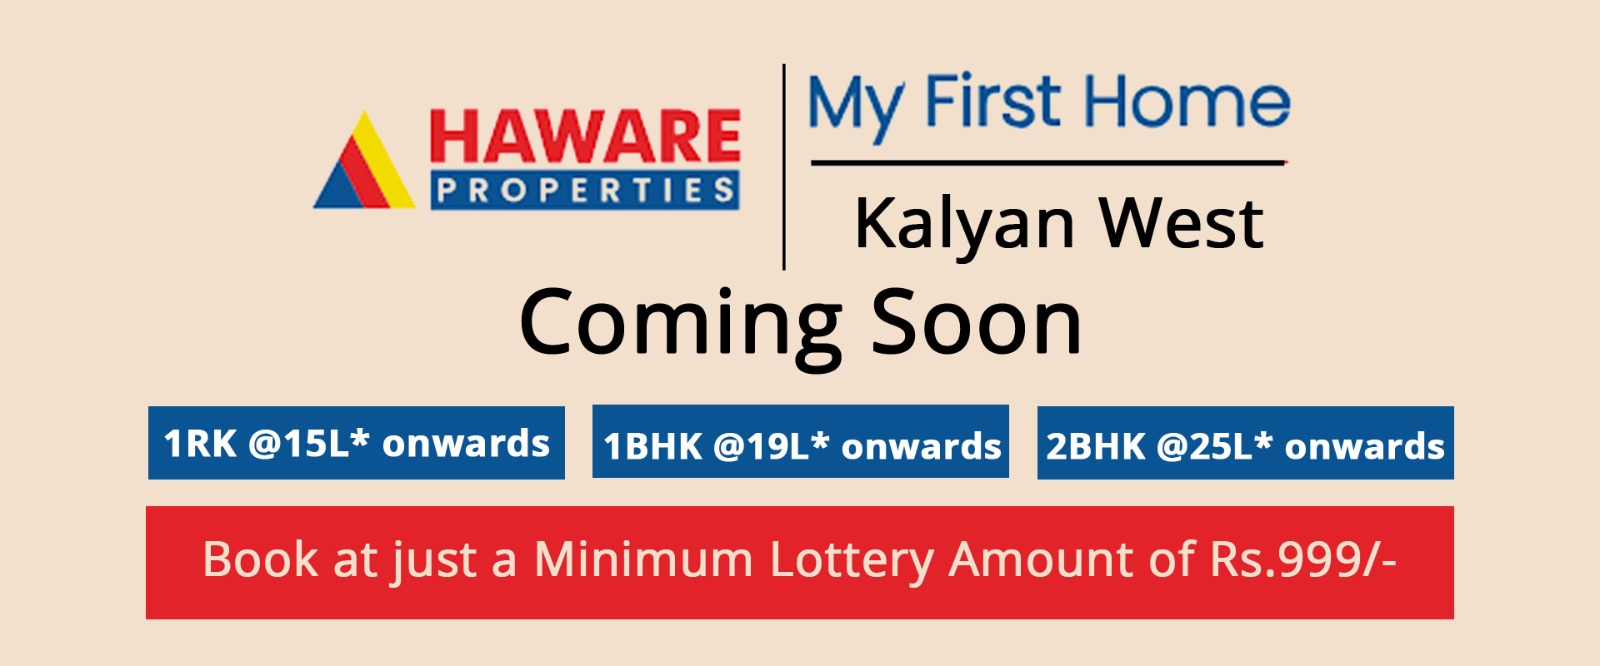 Haware My First Home | New Projects in Kalyan West